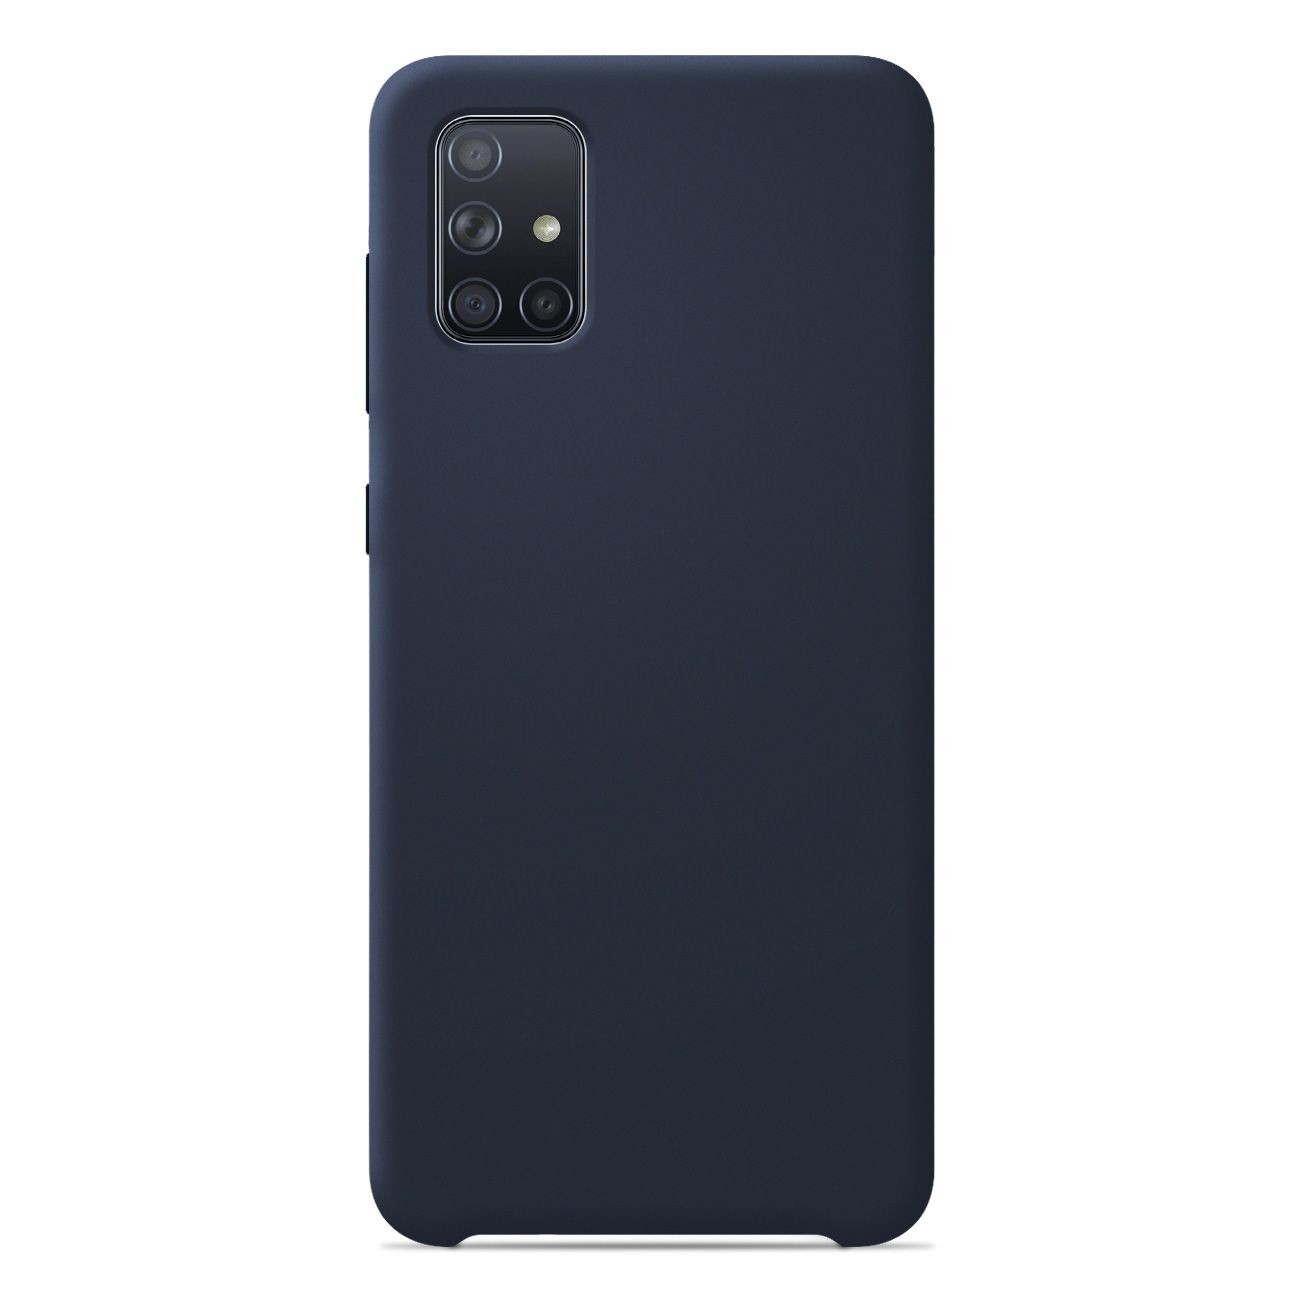 Coque silicone unie Soft Touch Bleu nuit compatible Samsung Galaxy A71